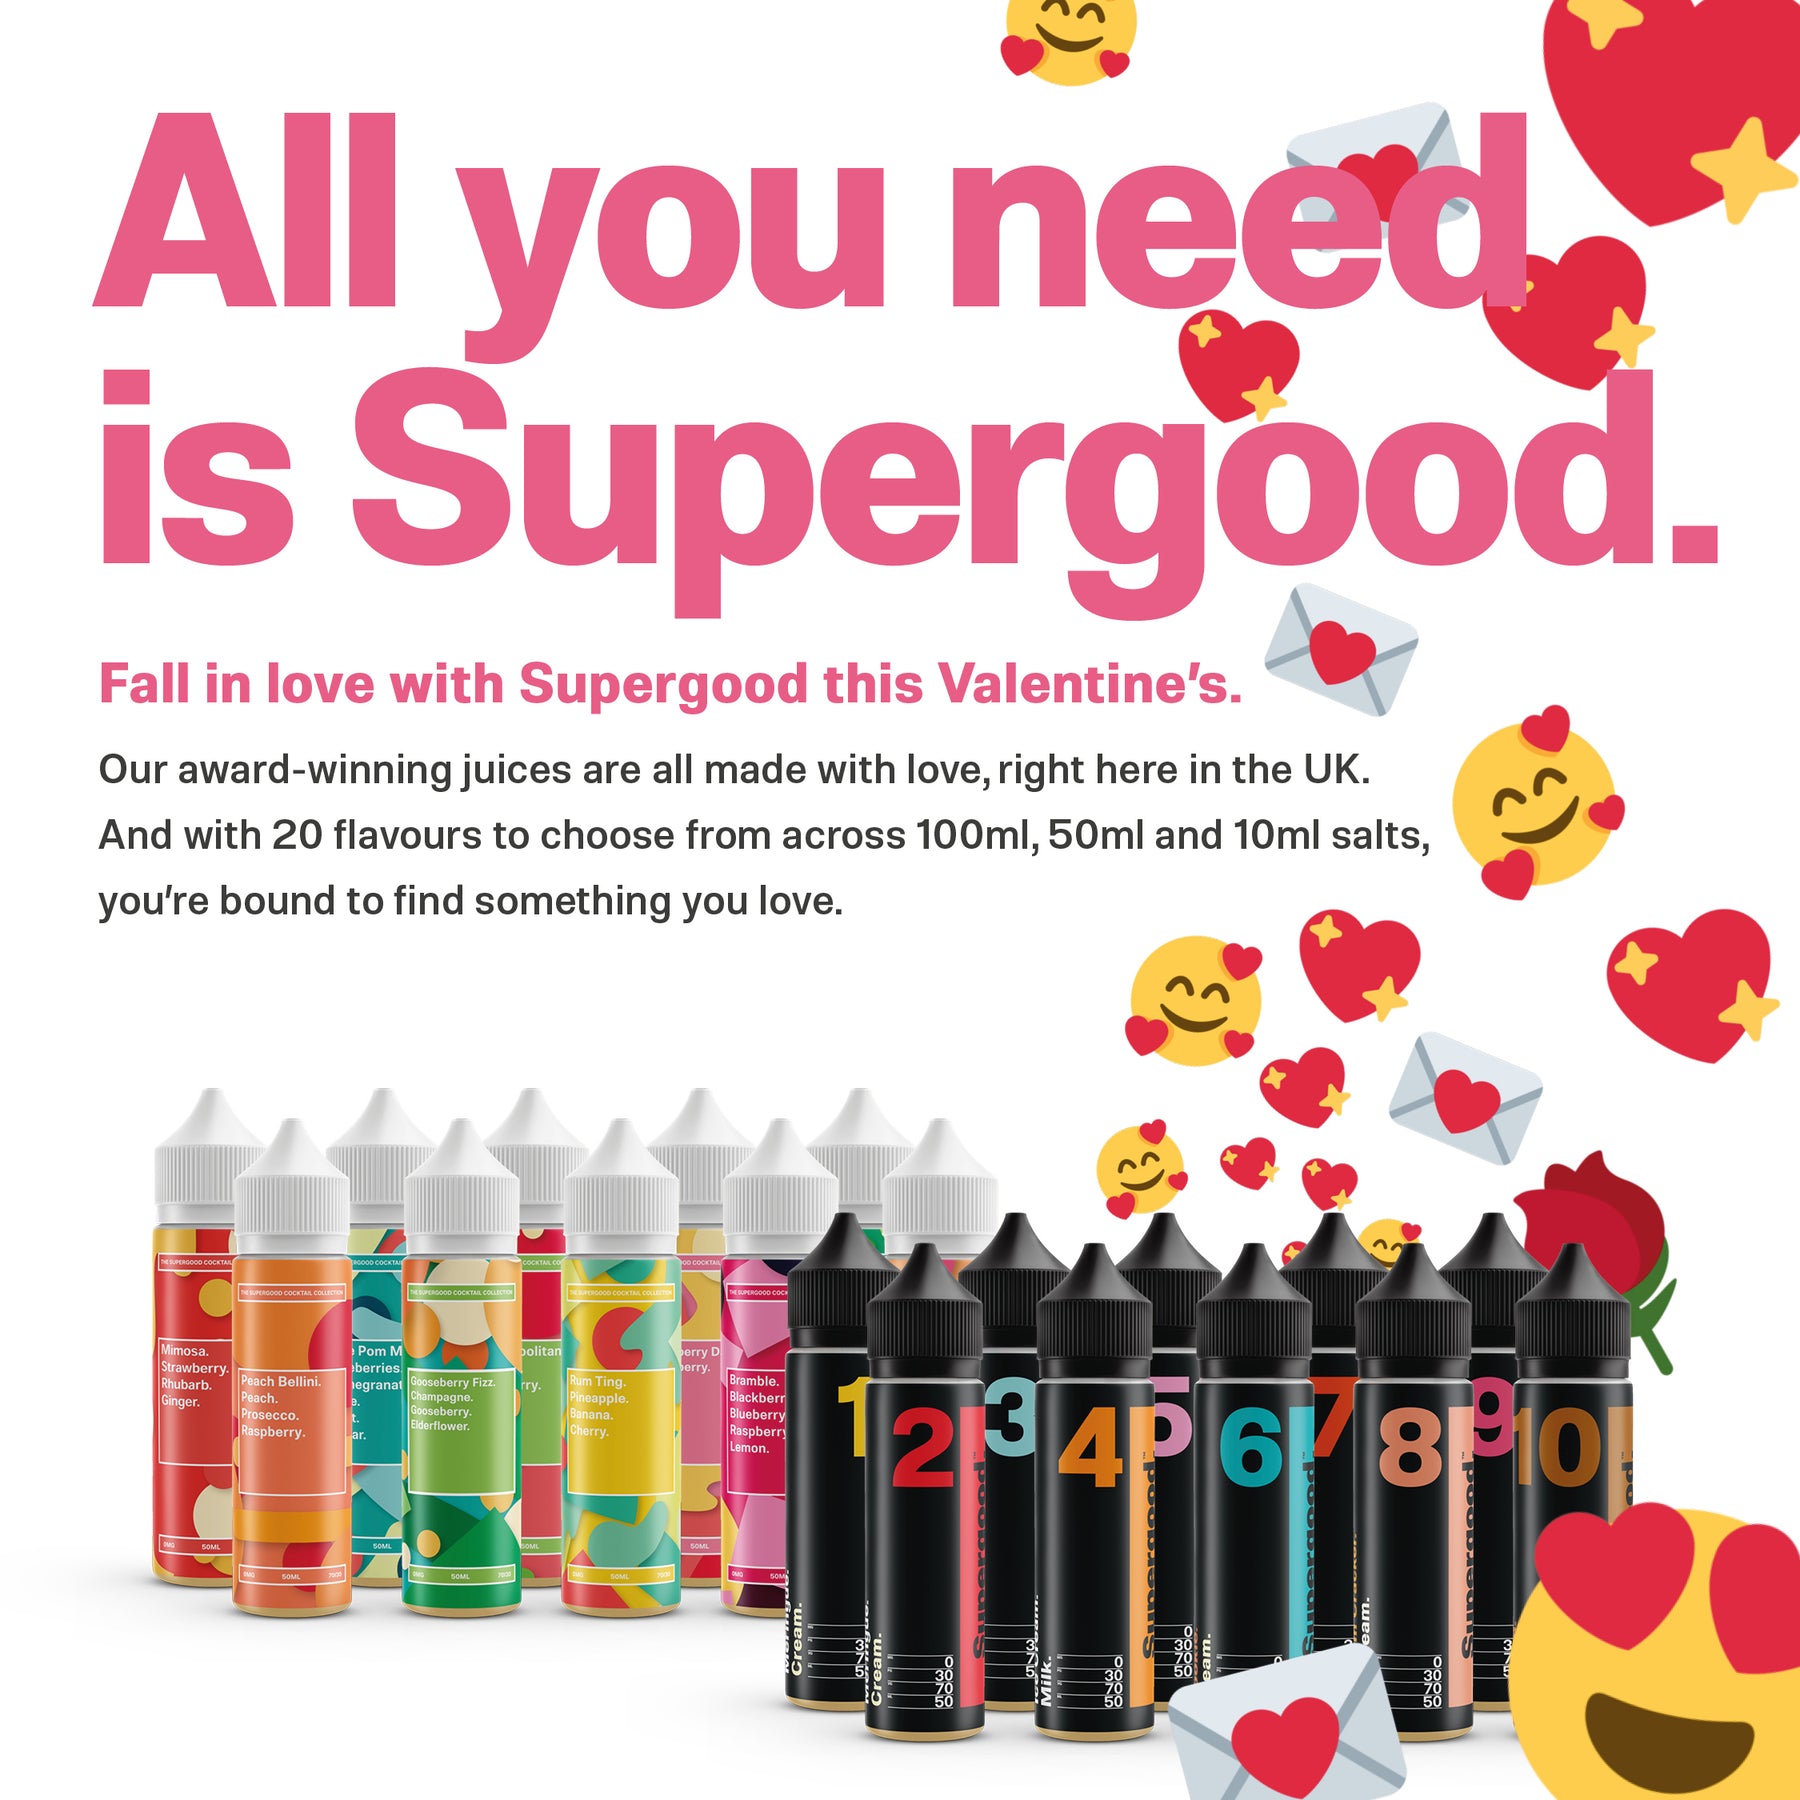 All you need is Supergood.